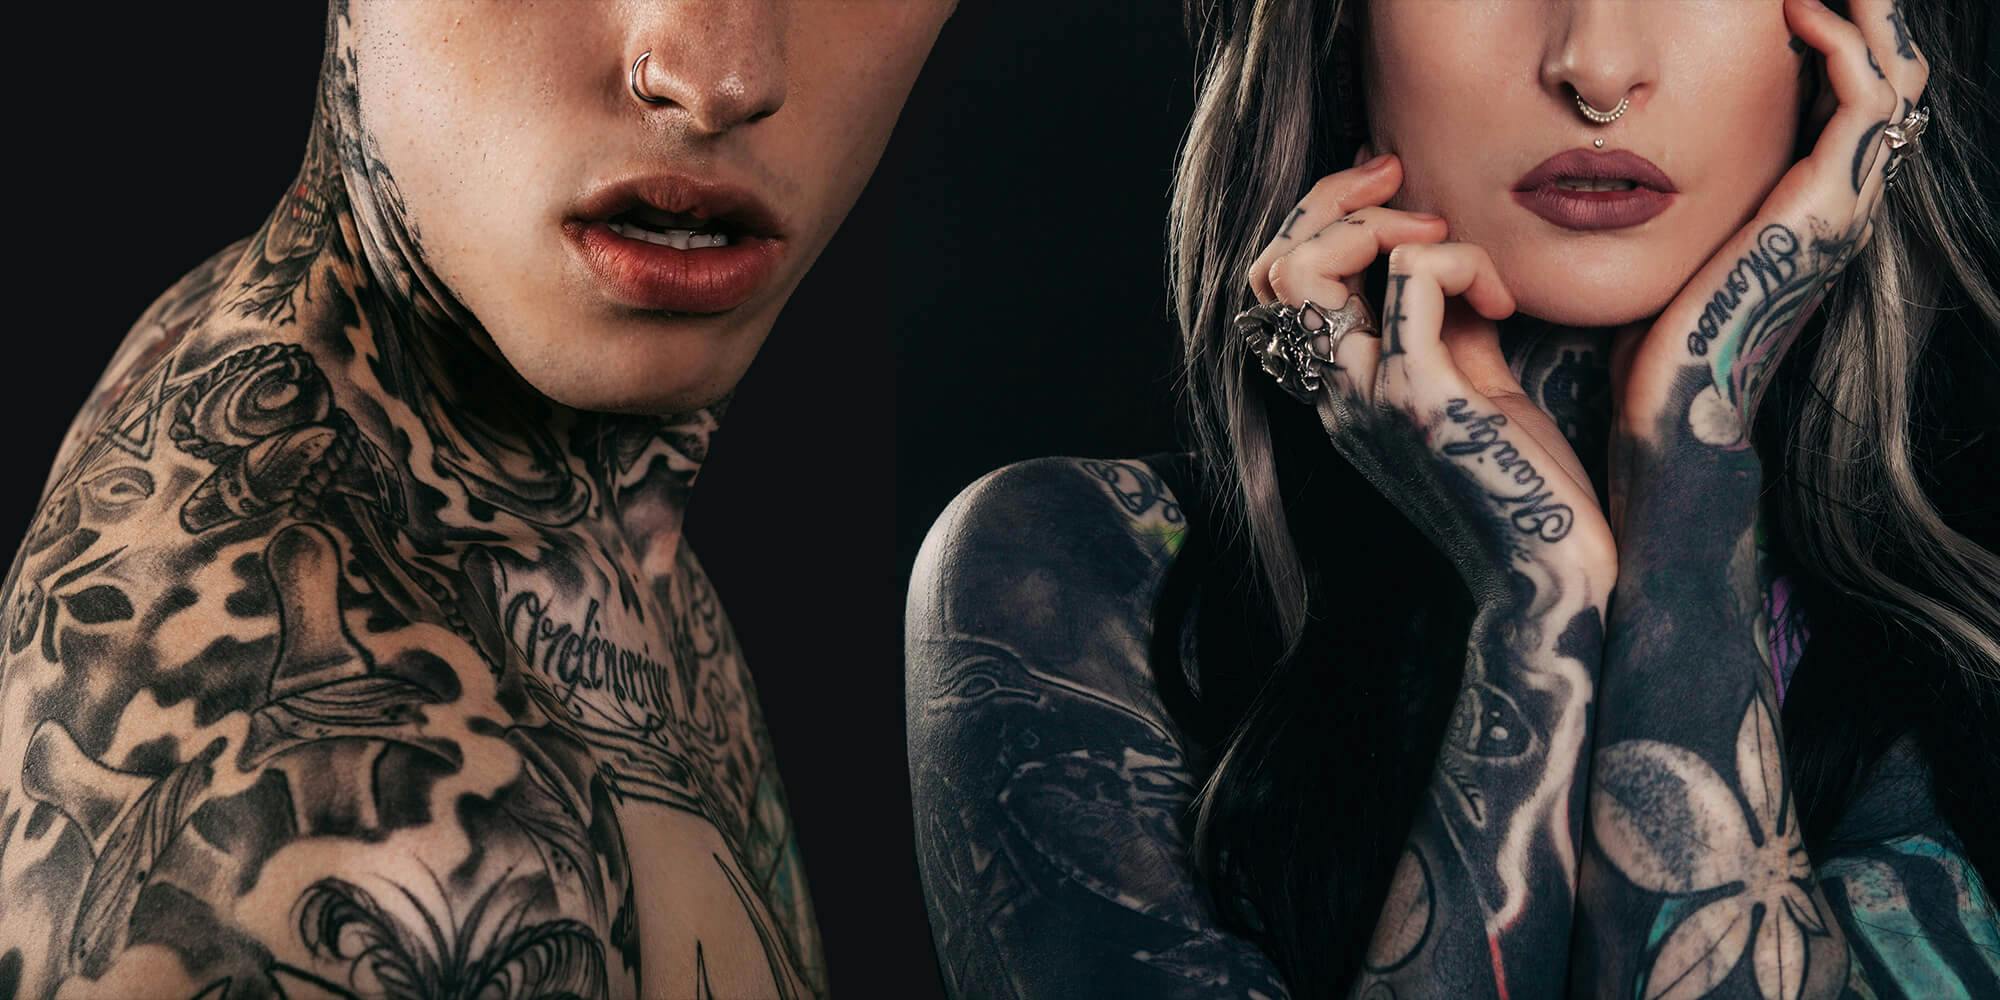 Got ink? The best porn sites for performers with body mods and tattoos